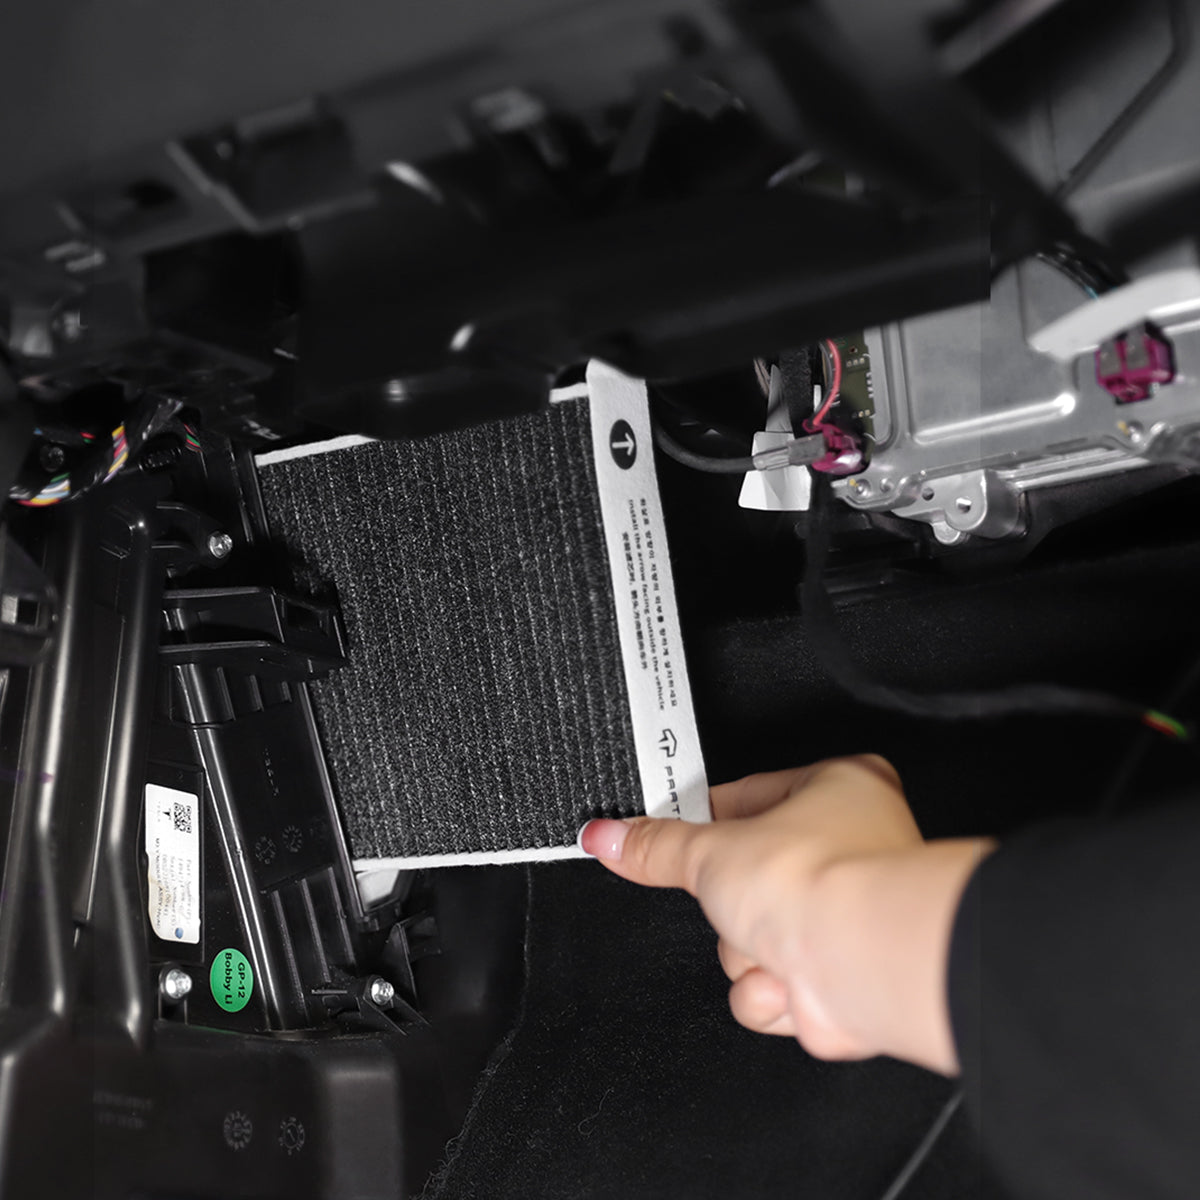 HEPA Activated Carbon Air Filter for Tesla Model 3 & Y